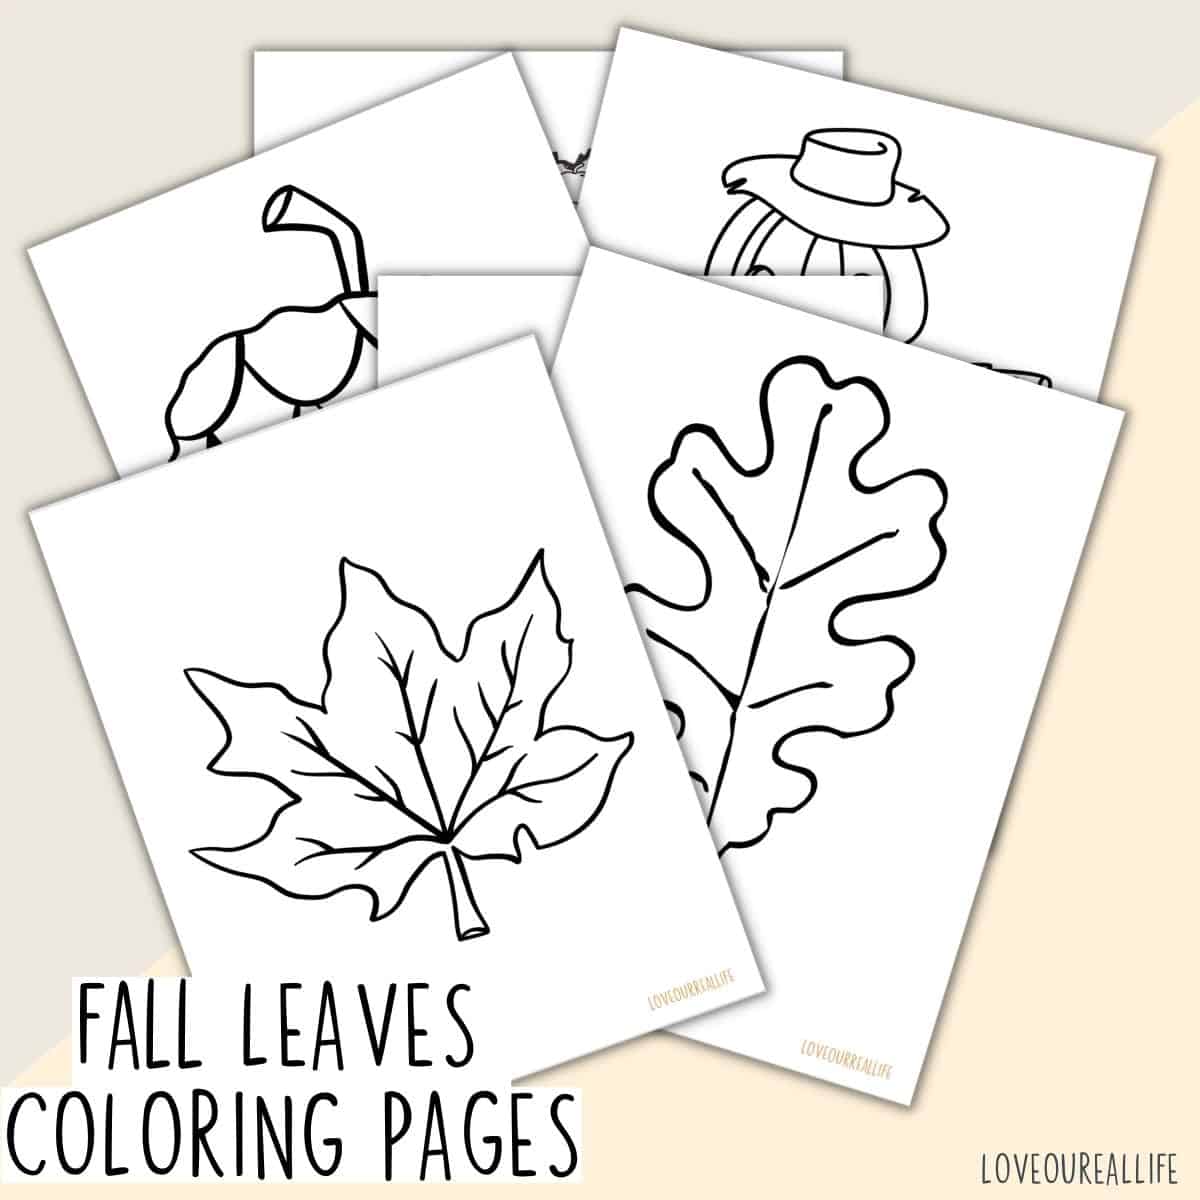 Fall leaves coloring pages free printable leaf templates â love our real life